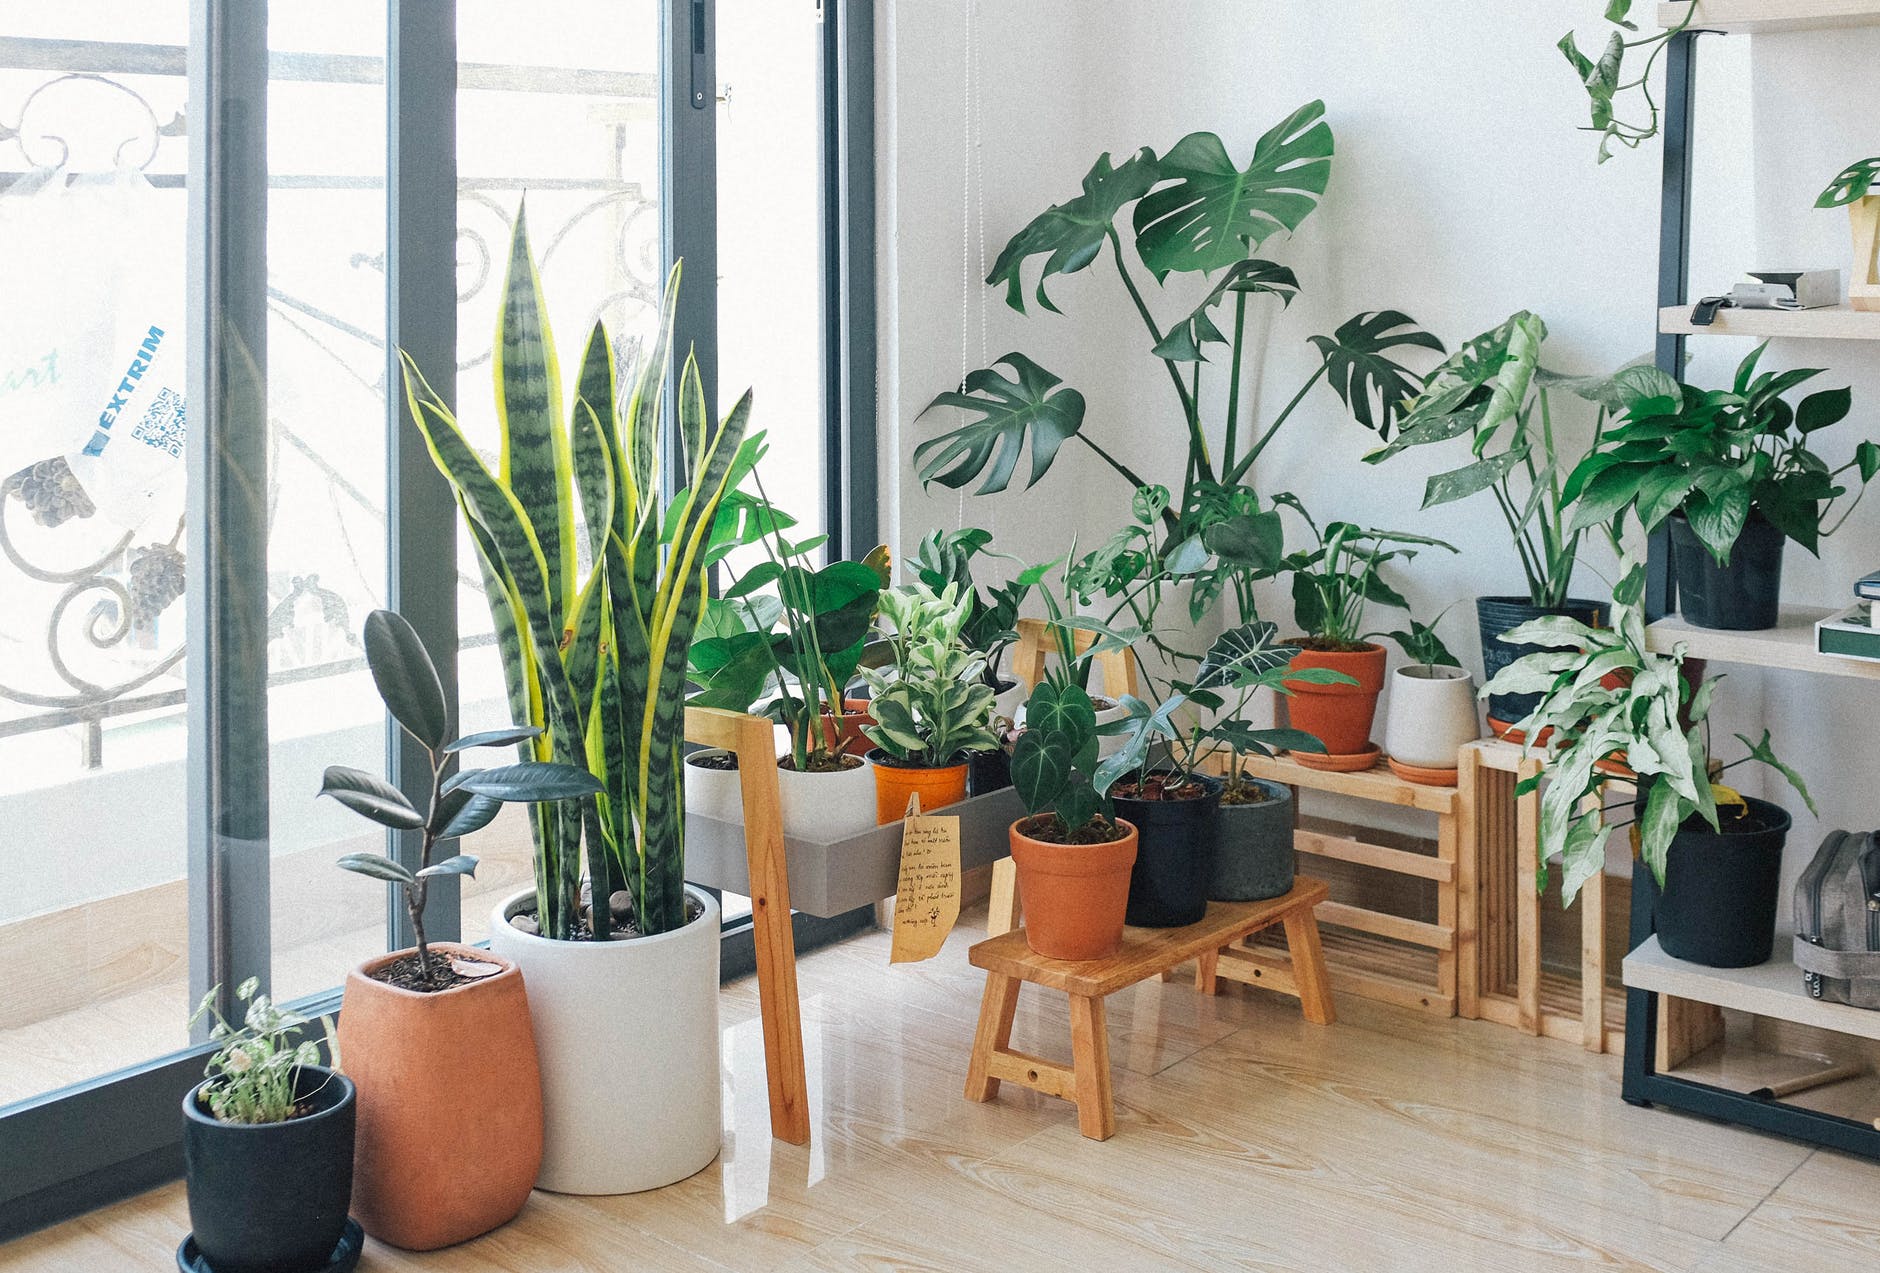 Most Demanding Indoor Plants to Liven Up Your Home Decor